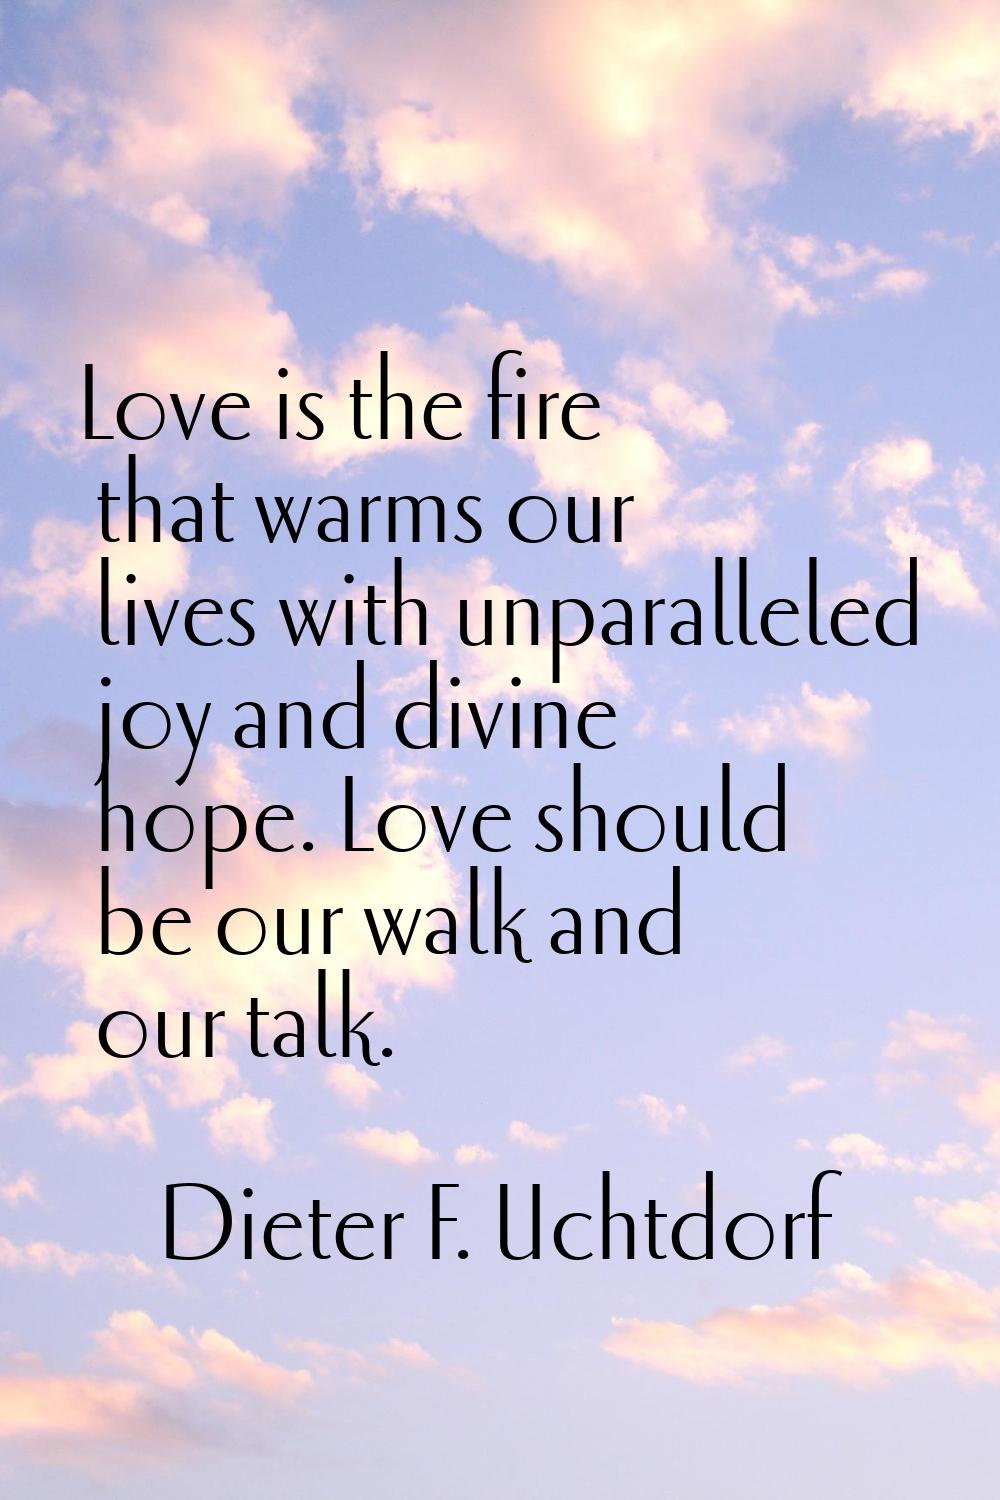 Love is the fire that warms our lives with unparalleled joy and divine hope. Love should be our wal